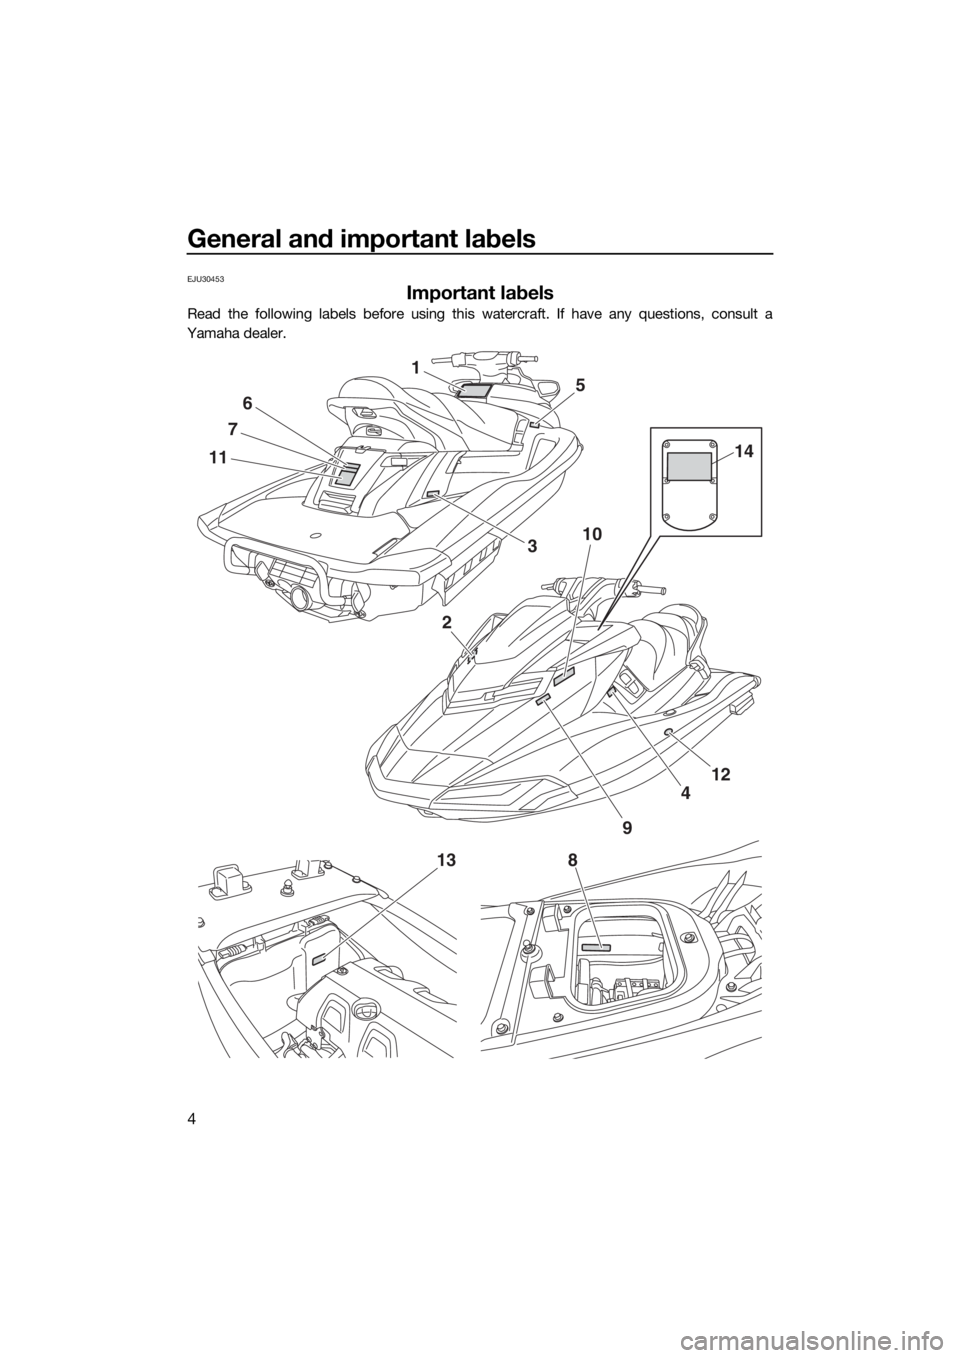 YAMAHA FX HO CRUISER 2017  Owners Manual General and important labels
4
EJU30453
Important labels
Read the following labels before using this watercraft. If have any questions, consult a
Yamaha dealer.
1
11
7
6
10
2
8
4
12
9
5
3
14
13
UF2T77